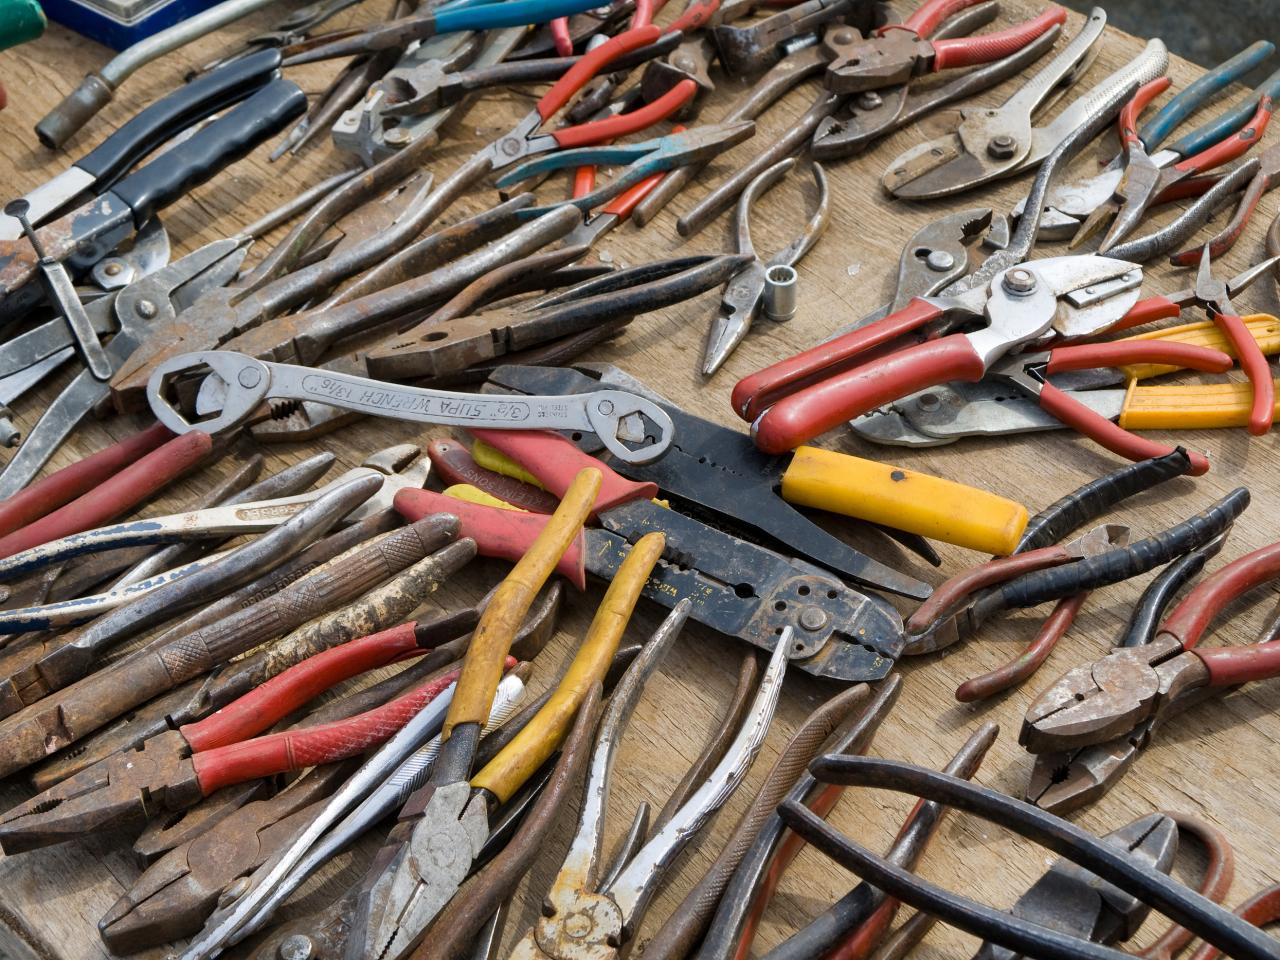 Where To Buy Second Hand Tools